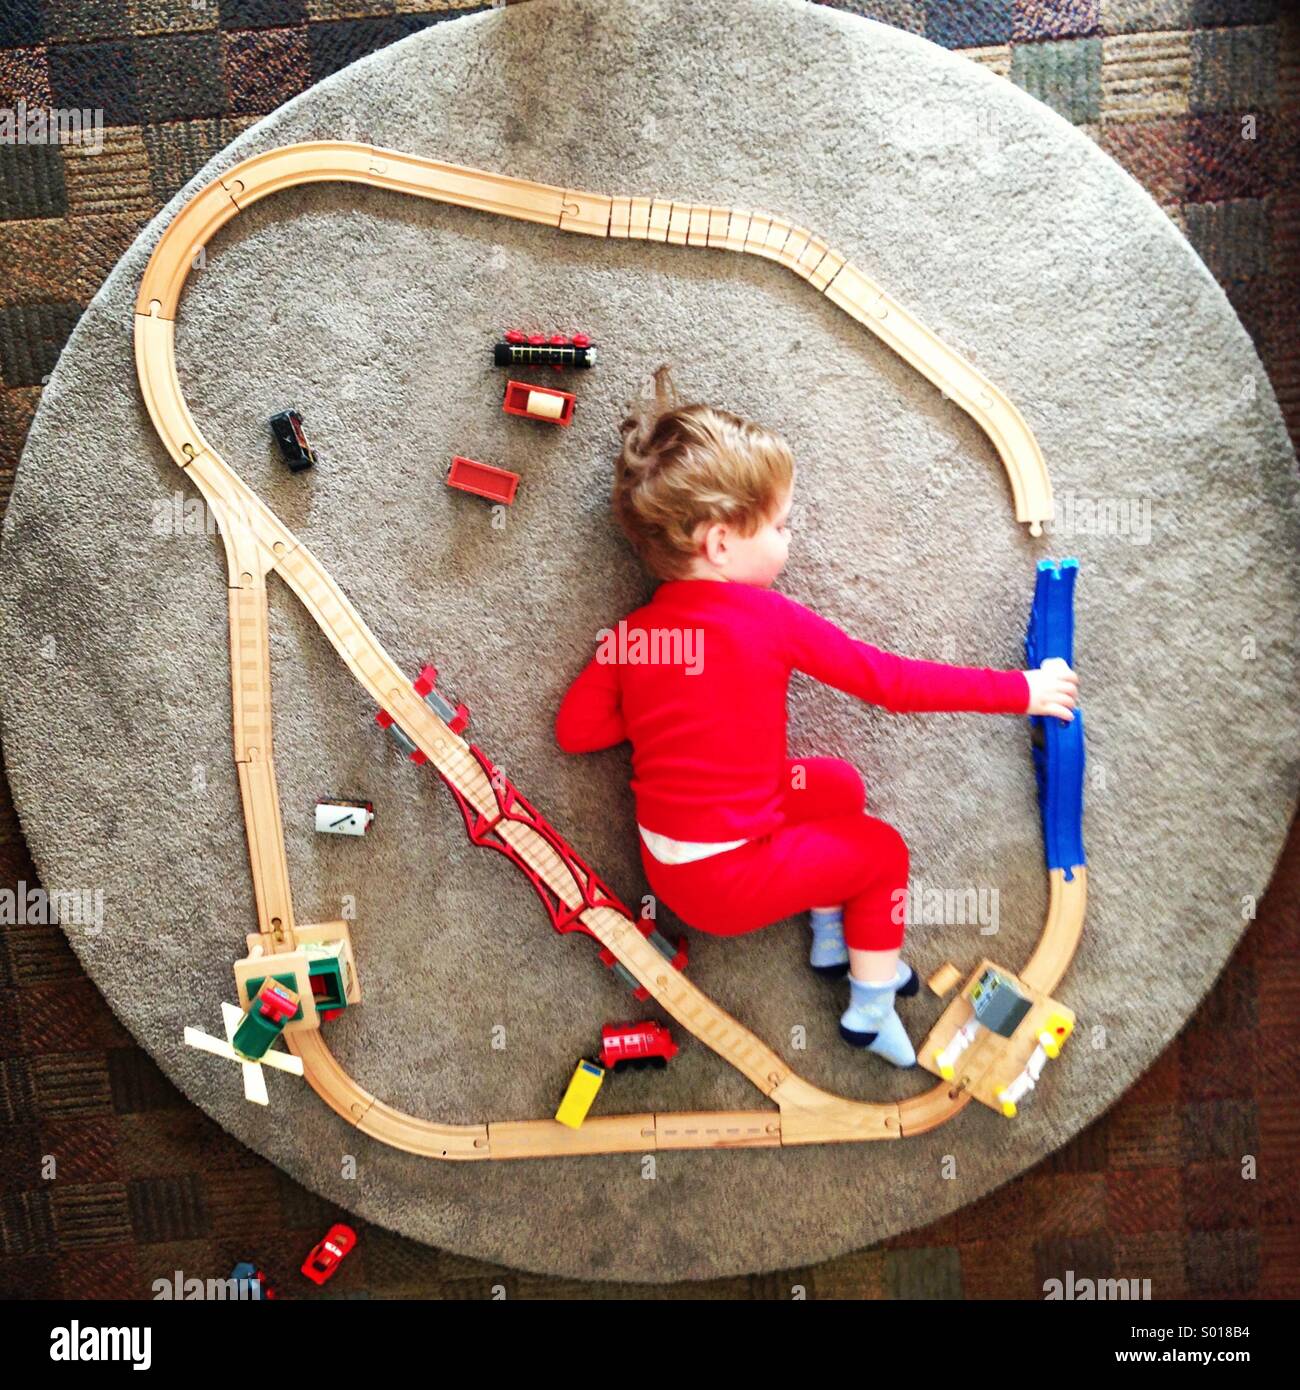 Little boy playing with a toy train track Stock Photo